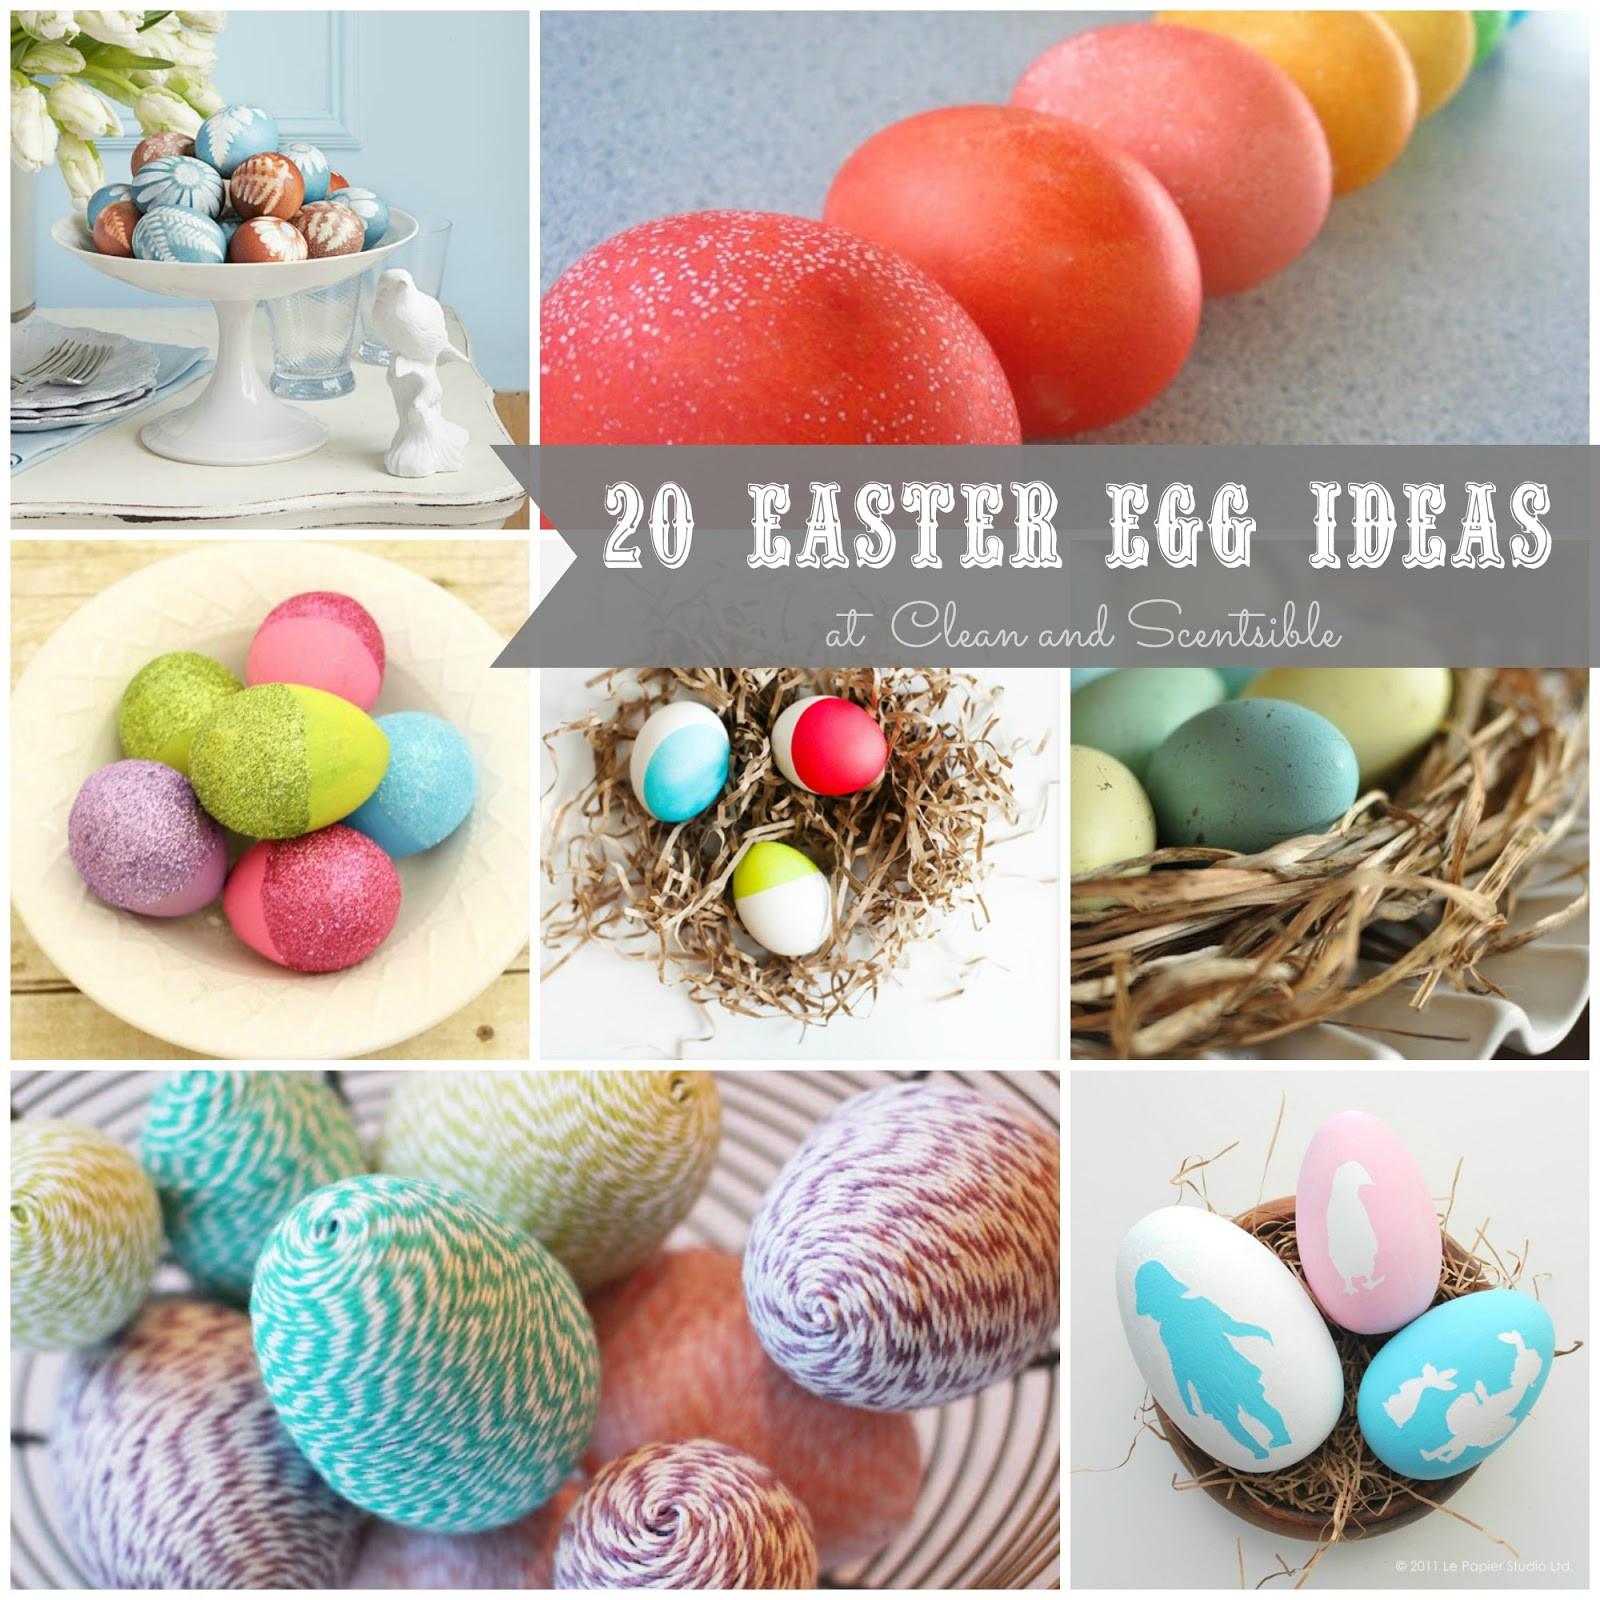 Creative Easter Egg Ideas
 How to Decorate Easter Eggs Clean and Scentsible